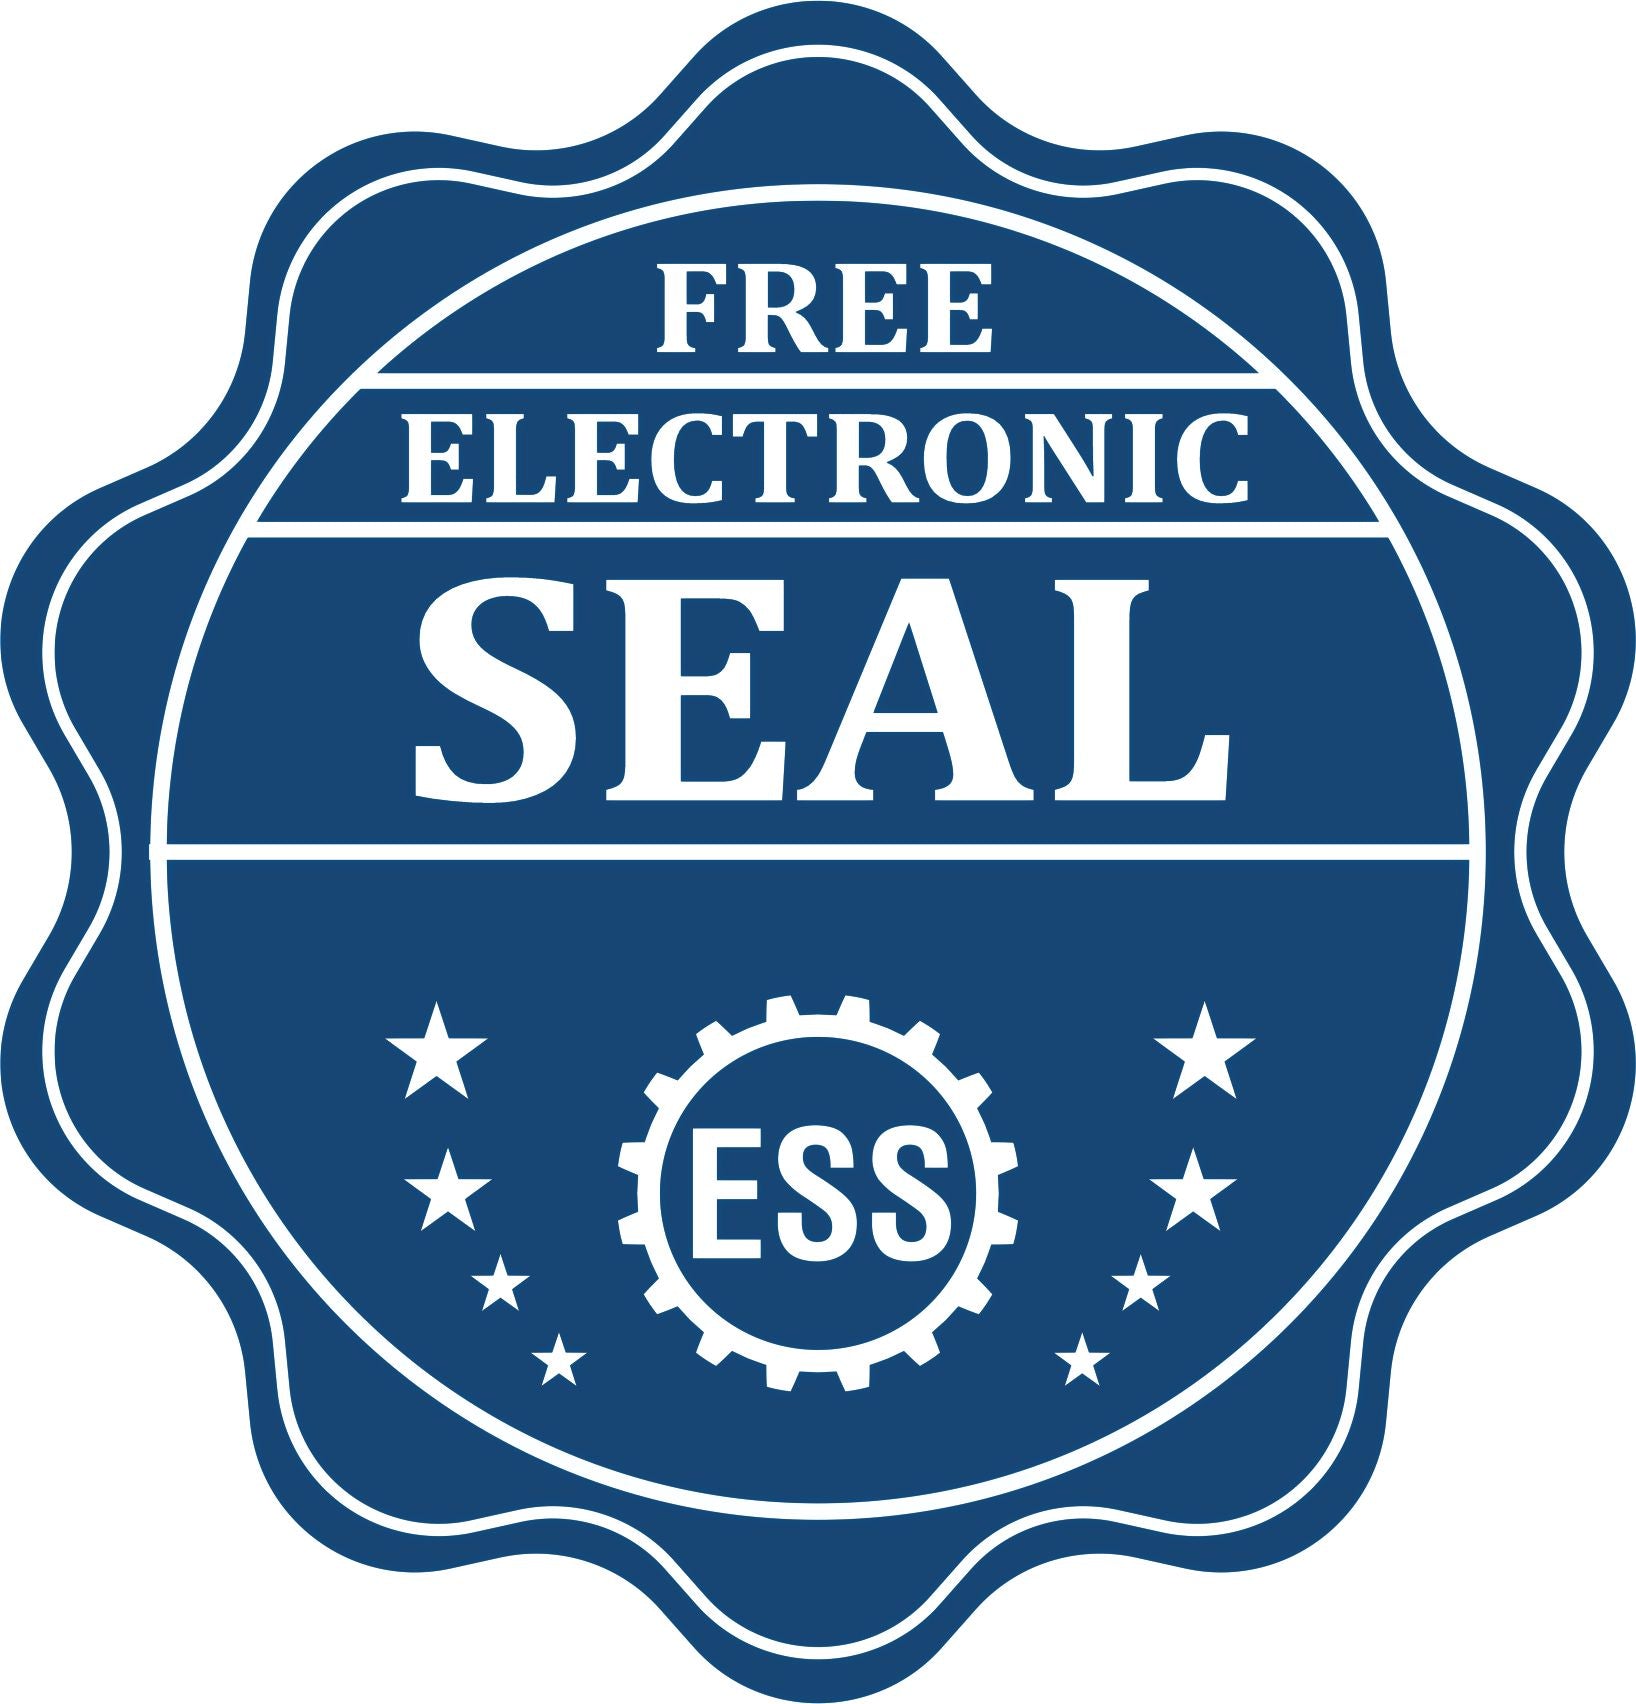 A badge showing a free electronic seal for the PSI Ohio Notary Stamp with stars and the ESS gear on the emblem.